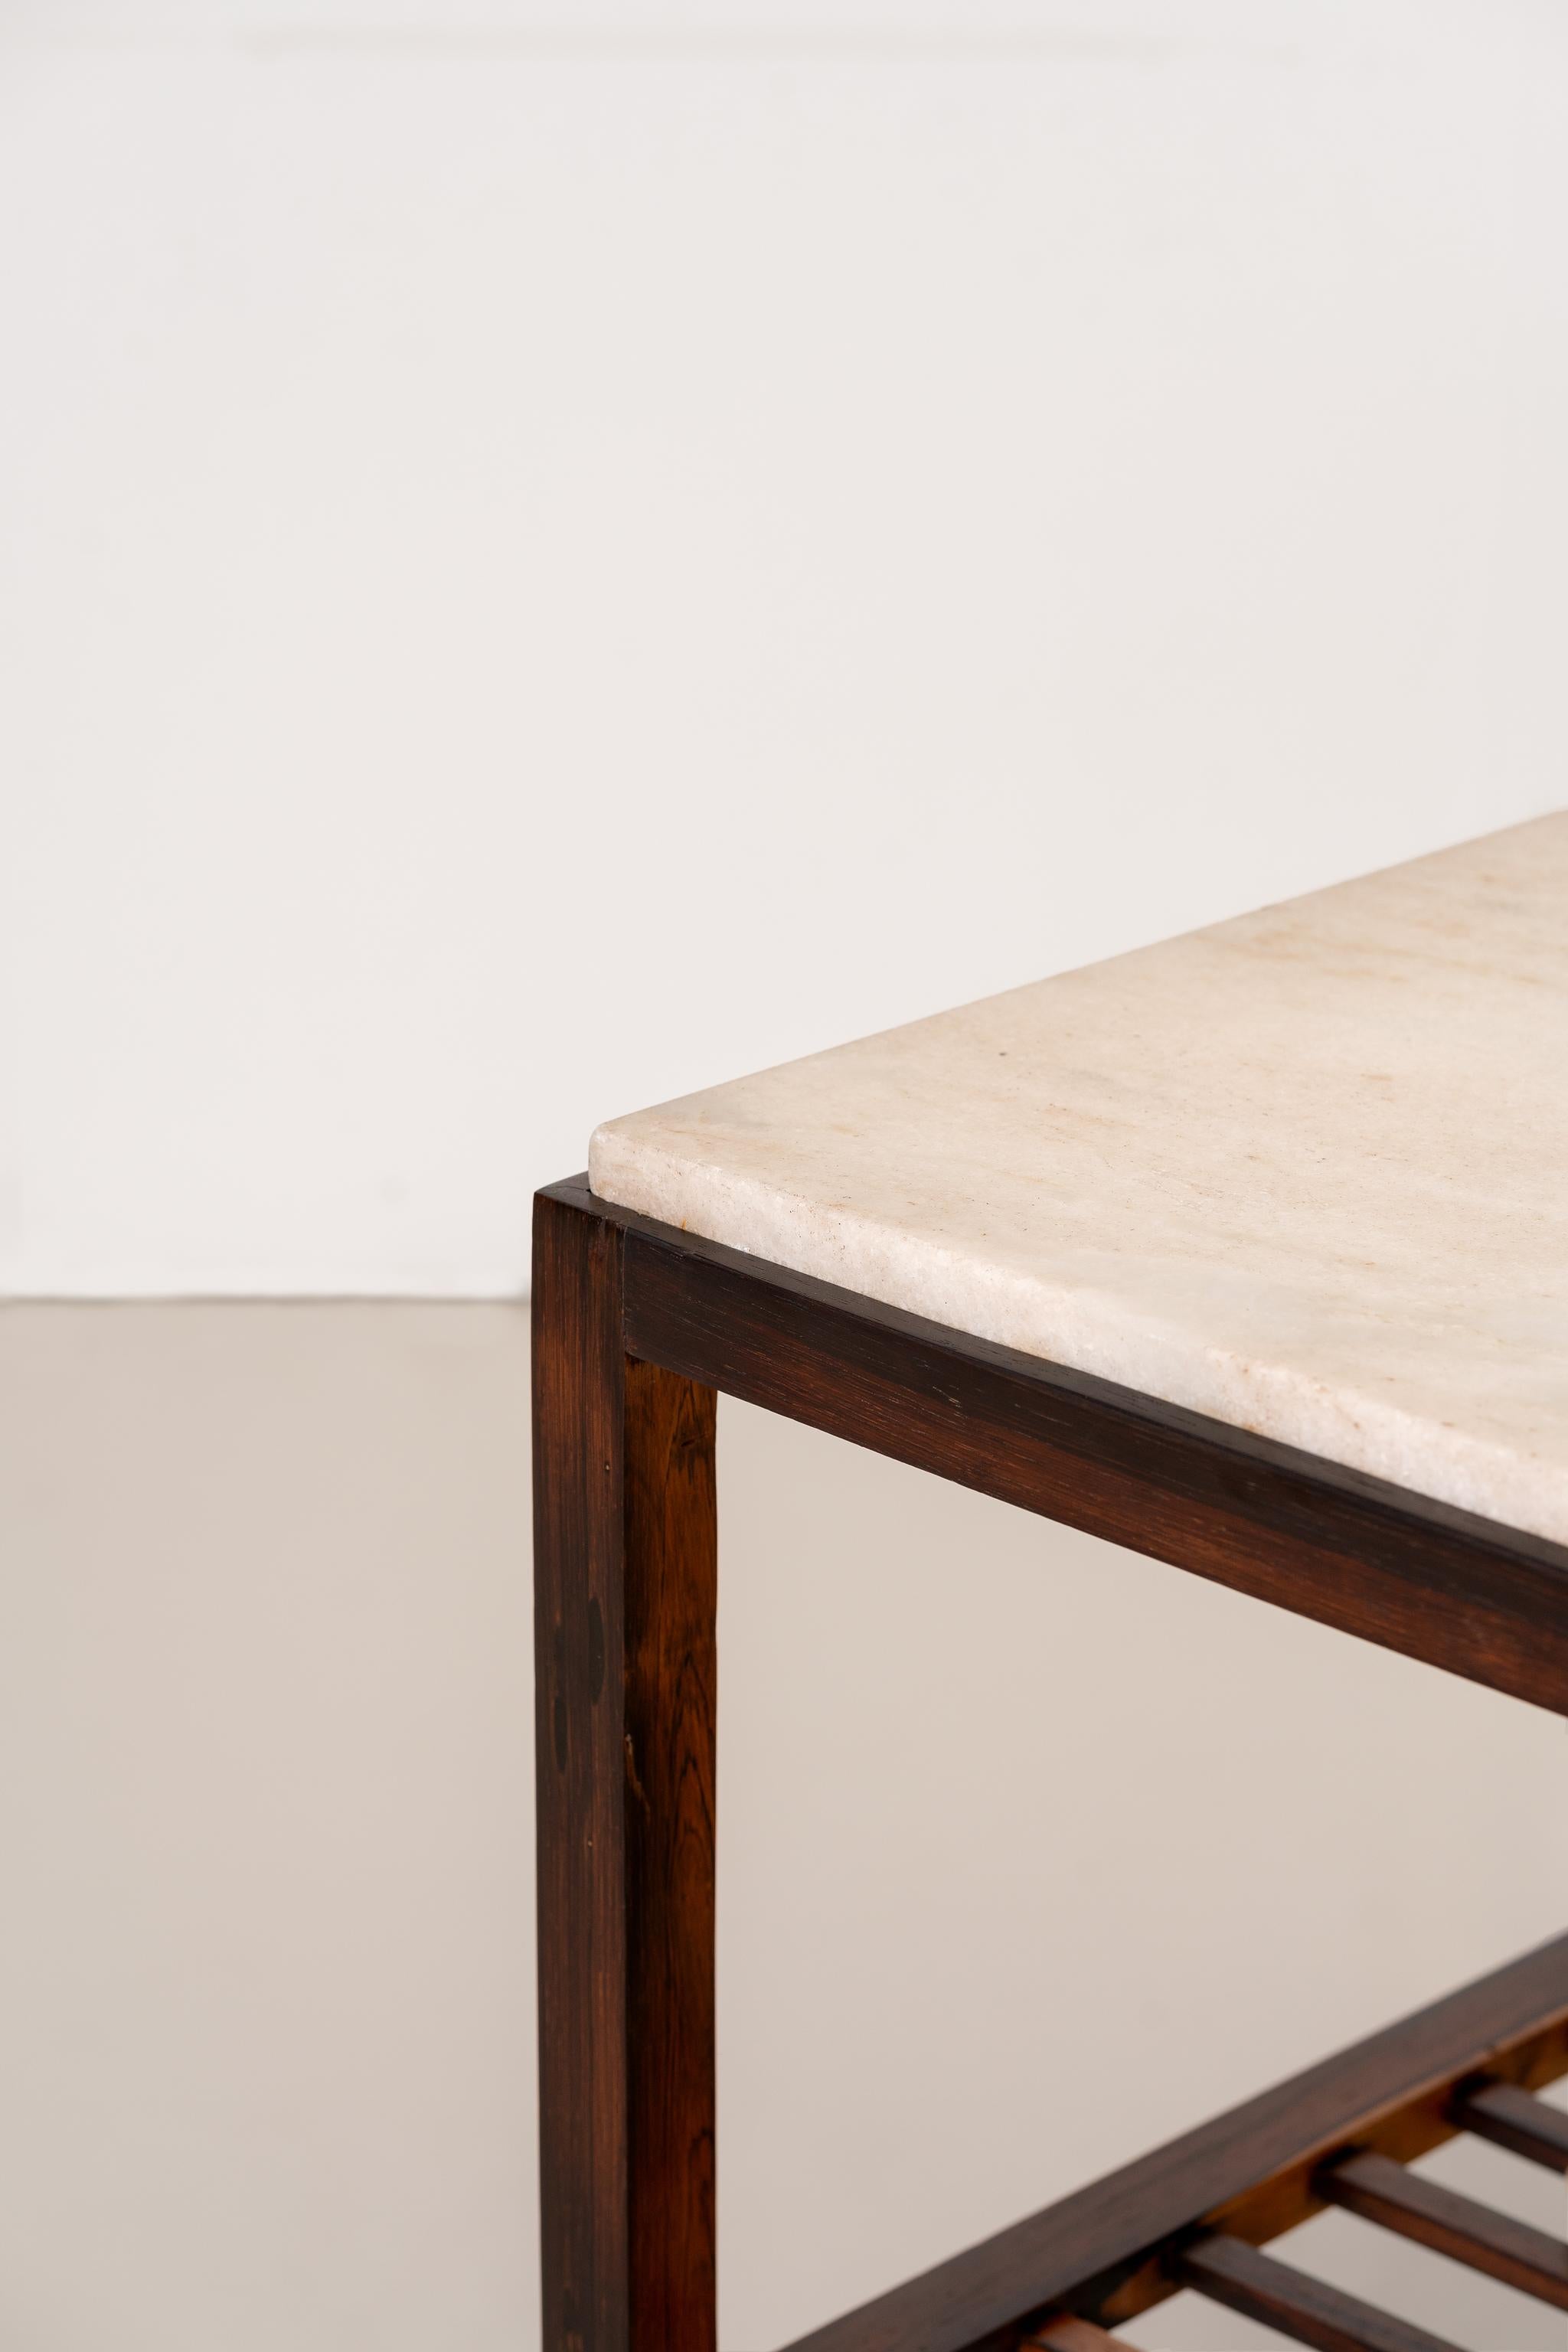 Woodwork Brazilian Midcentury Side Table in Rosewood and Marble, c. 1960 For Sale